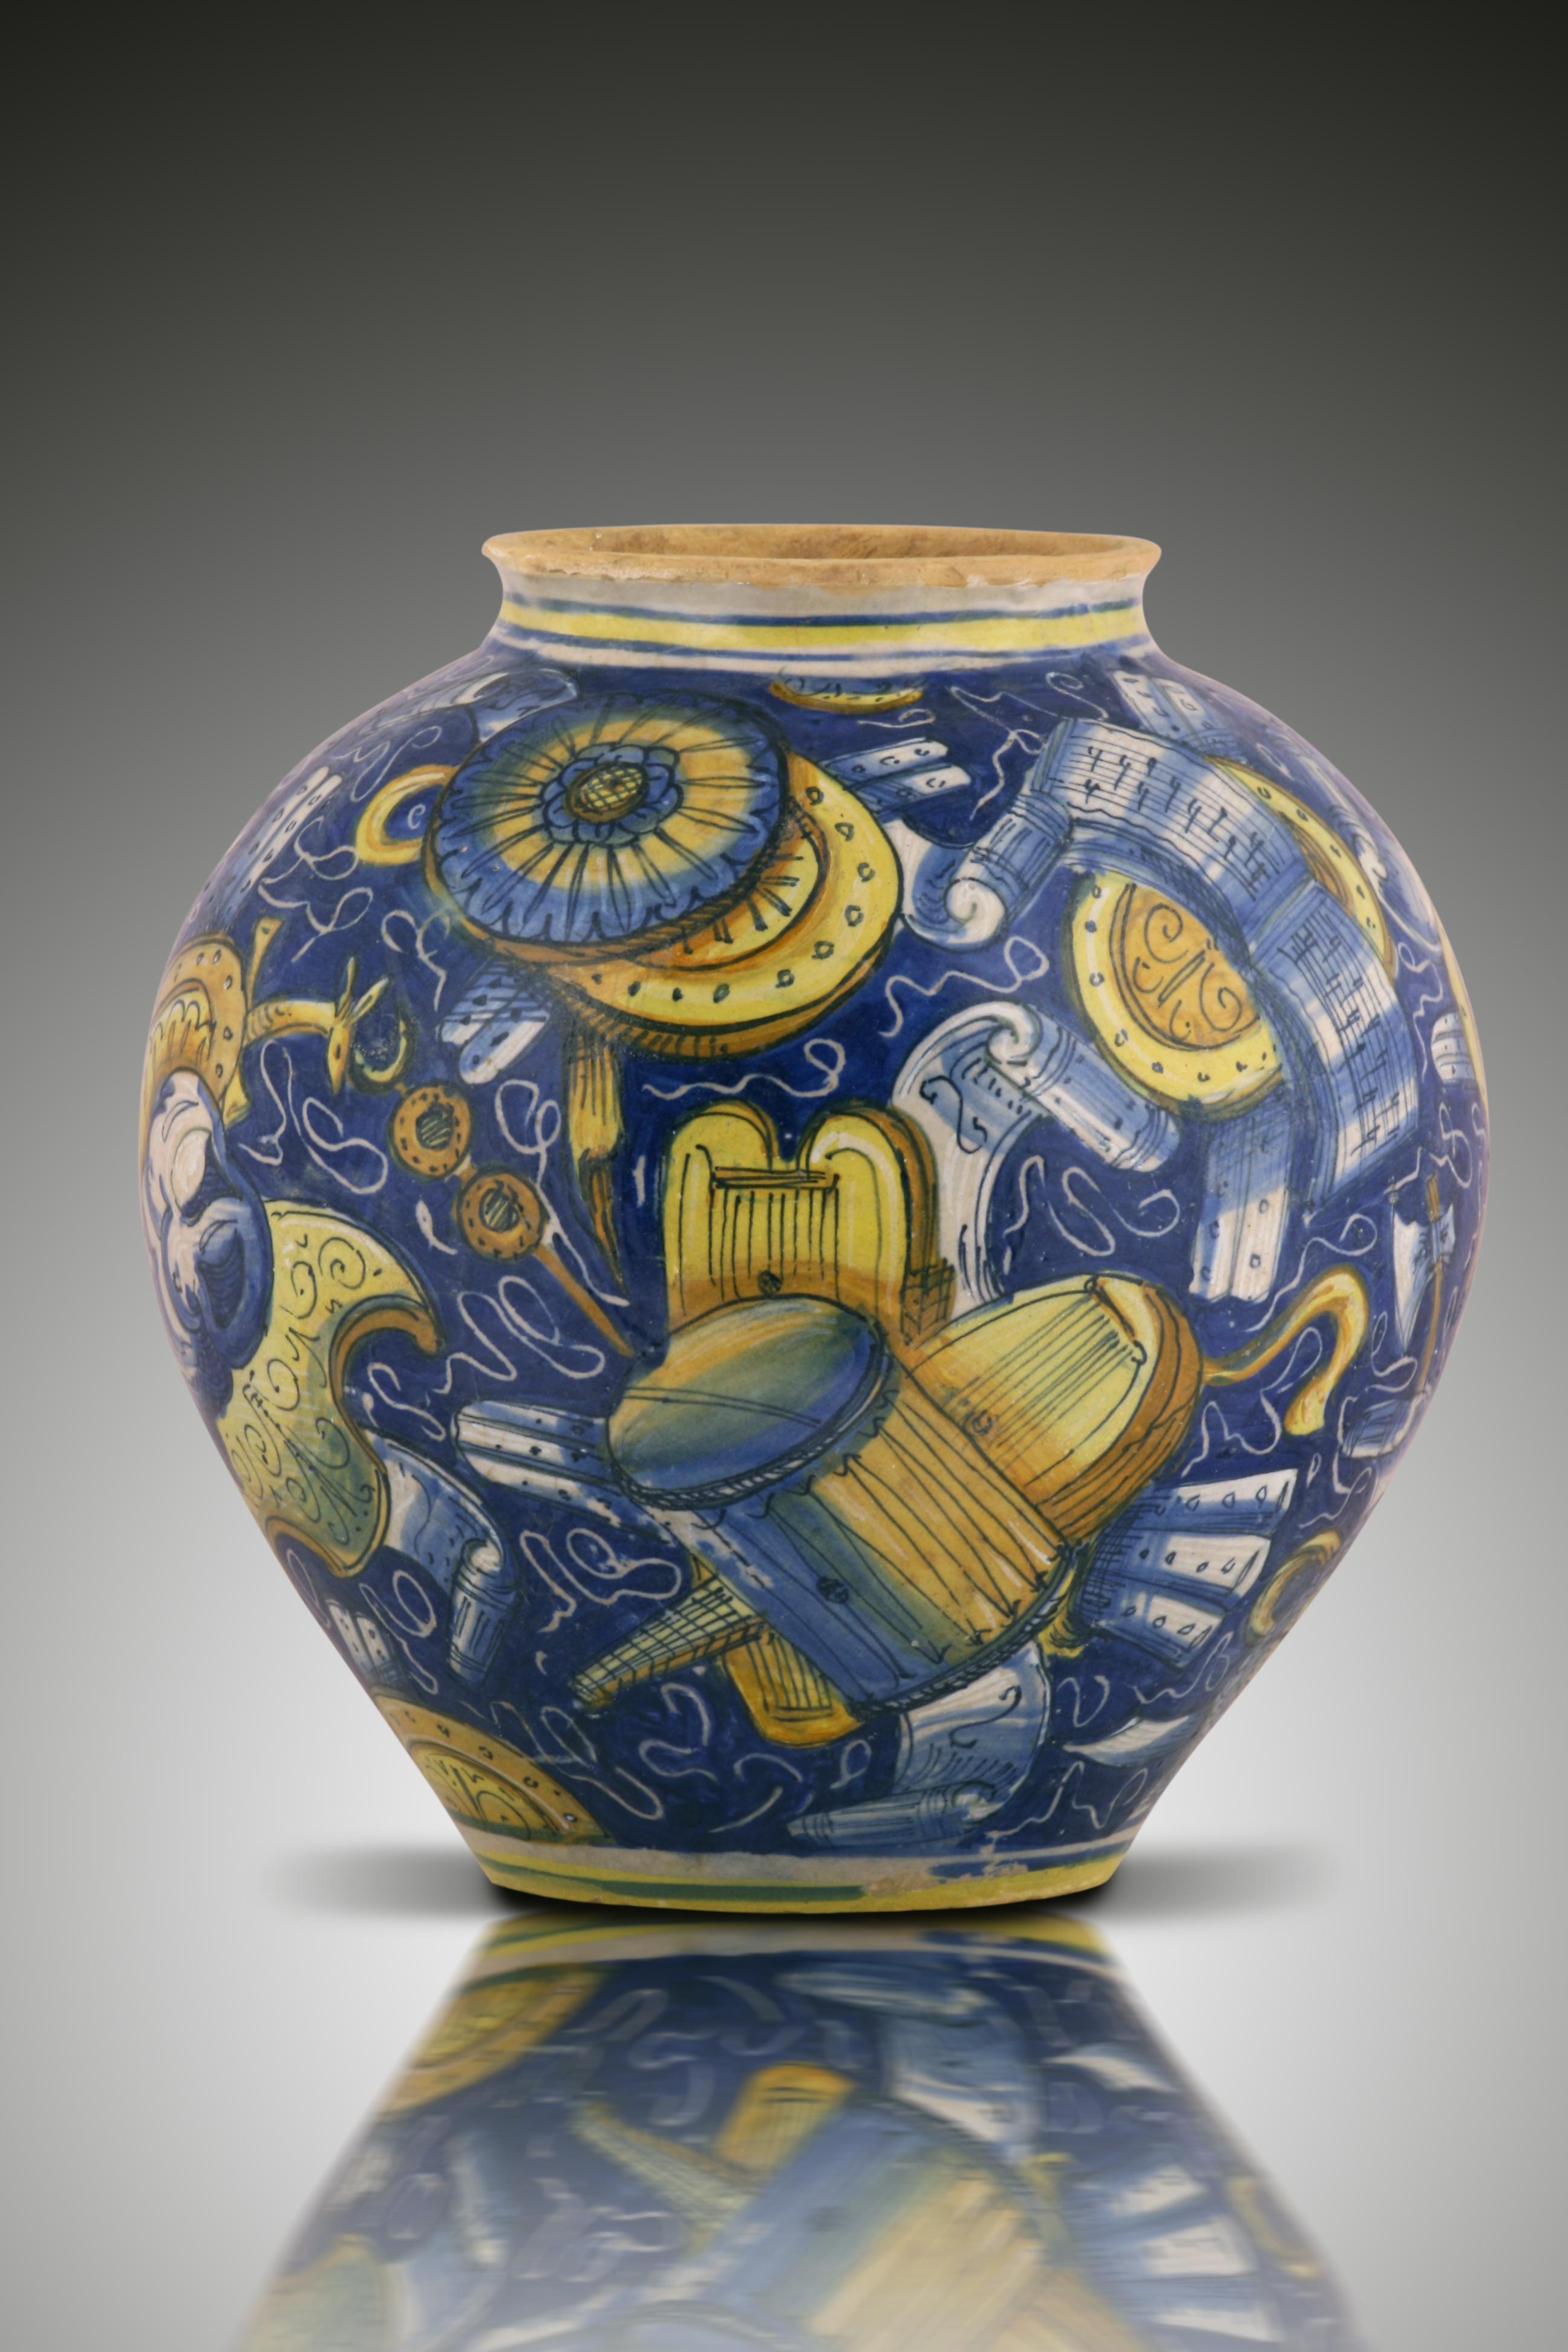 A Venezia vase-bowl Maiolica fully decorated in ochre, yellow, black on blue-ground scattered with military trophies including shields helmets, drums and music partitions. Concentric blue and ochre lines at the neck and foot. Workshop of maestro